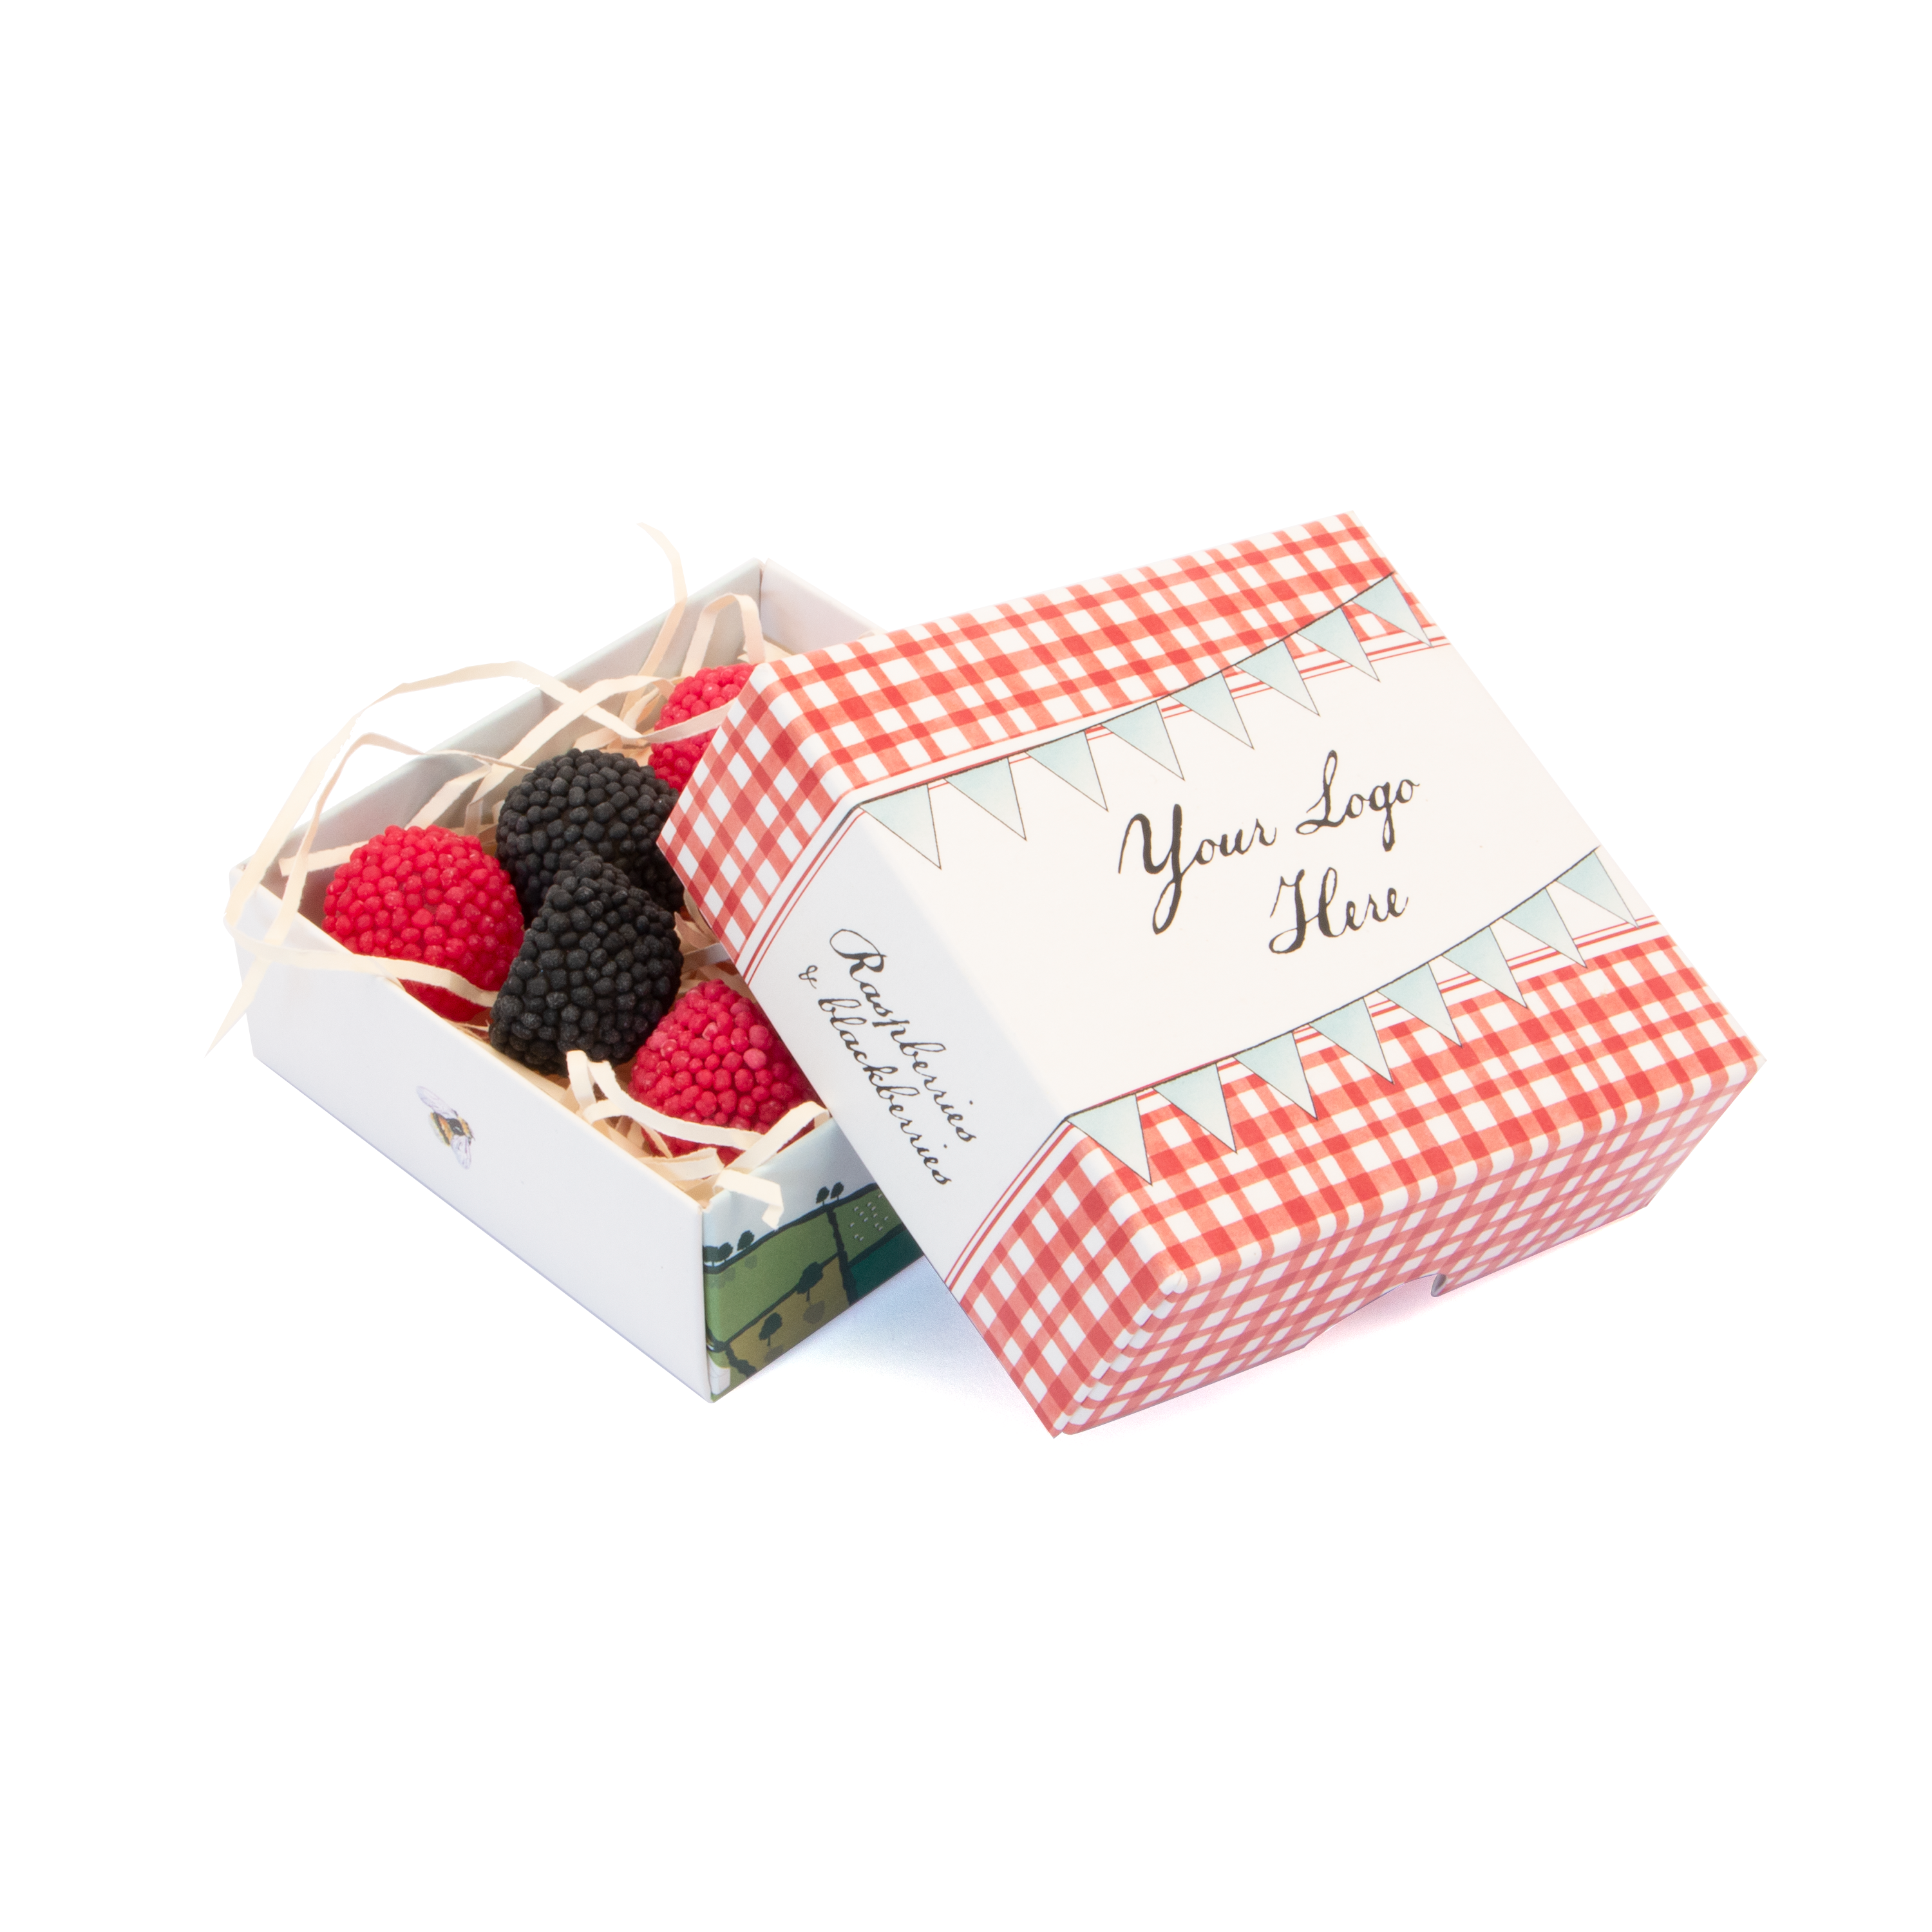 Summer Collection - Eco Treat Box - Blackberries and Raspberries